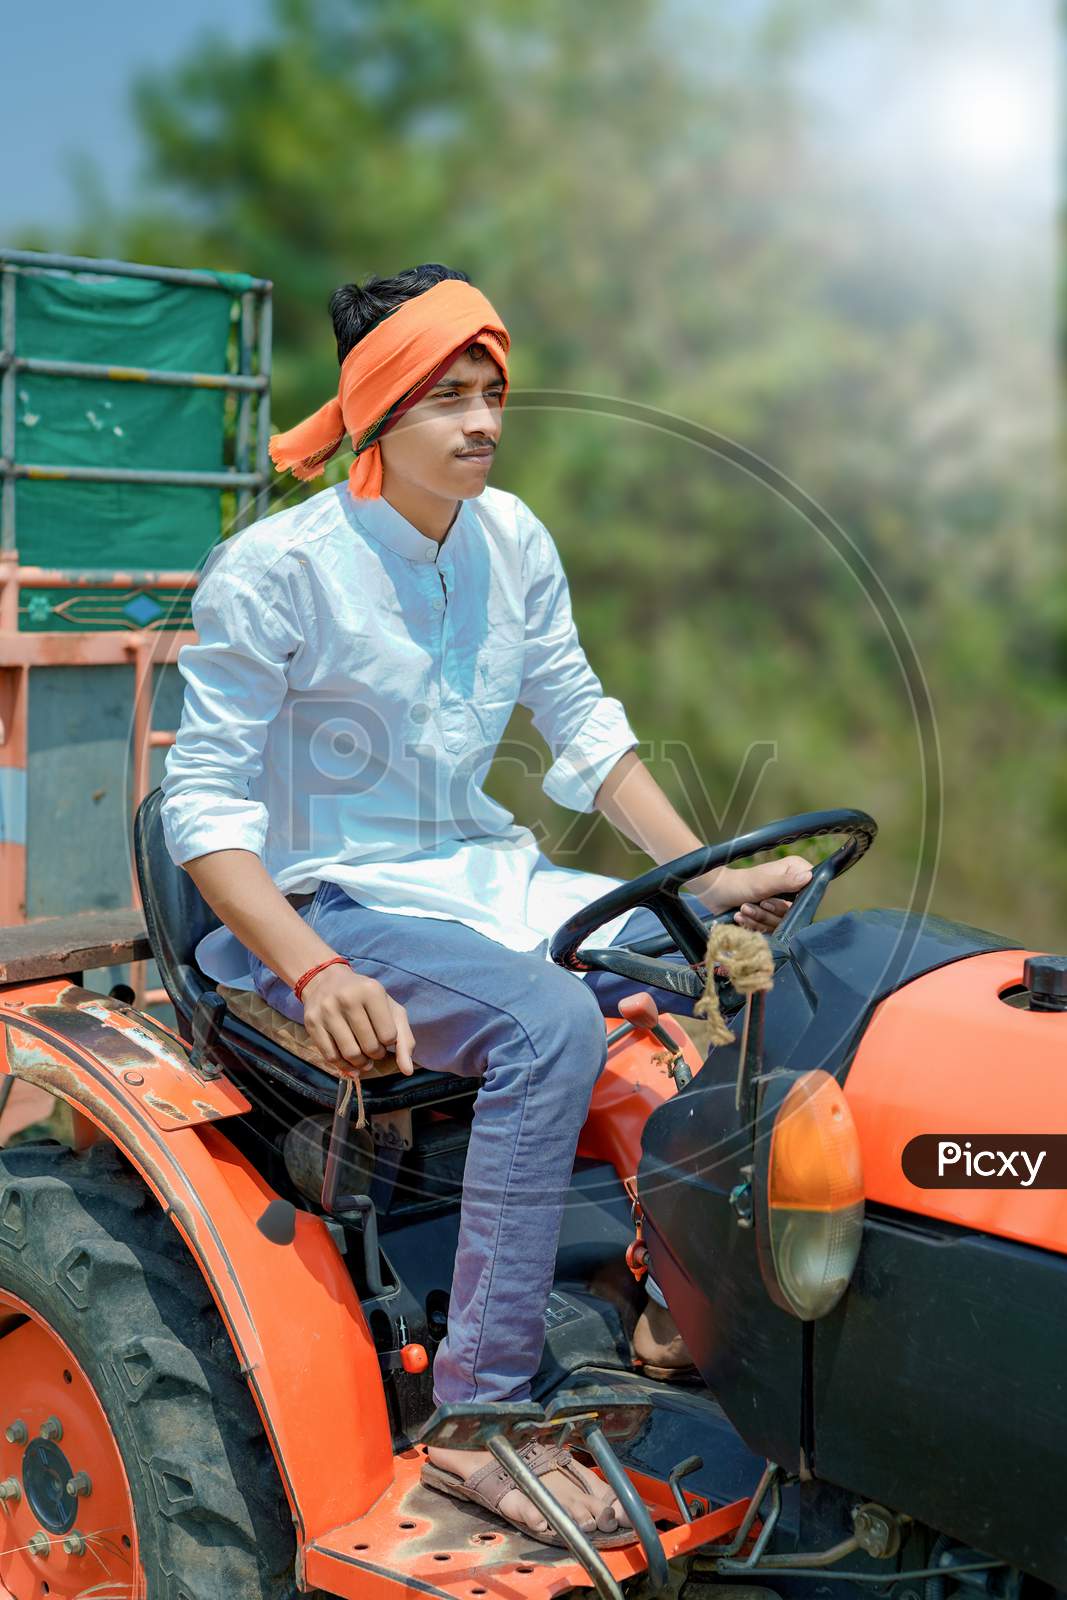 young Indian farmer